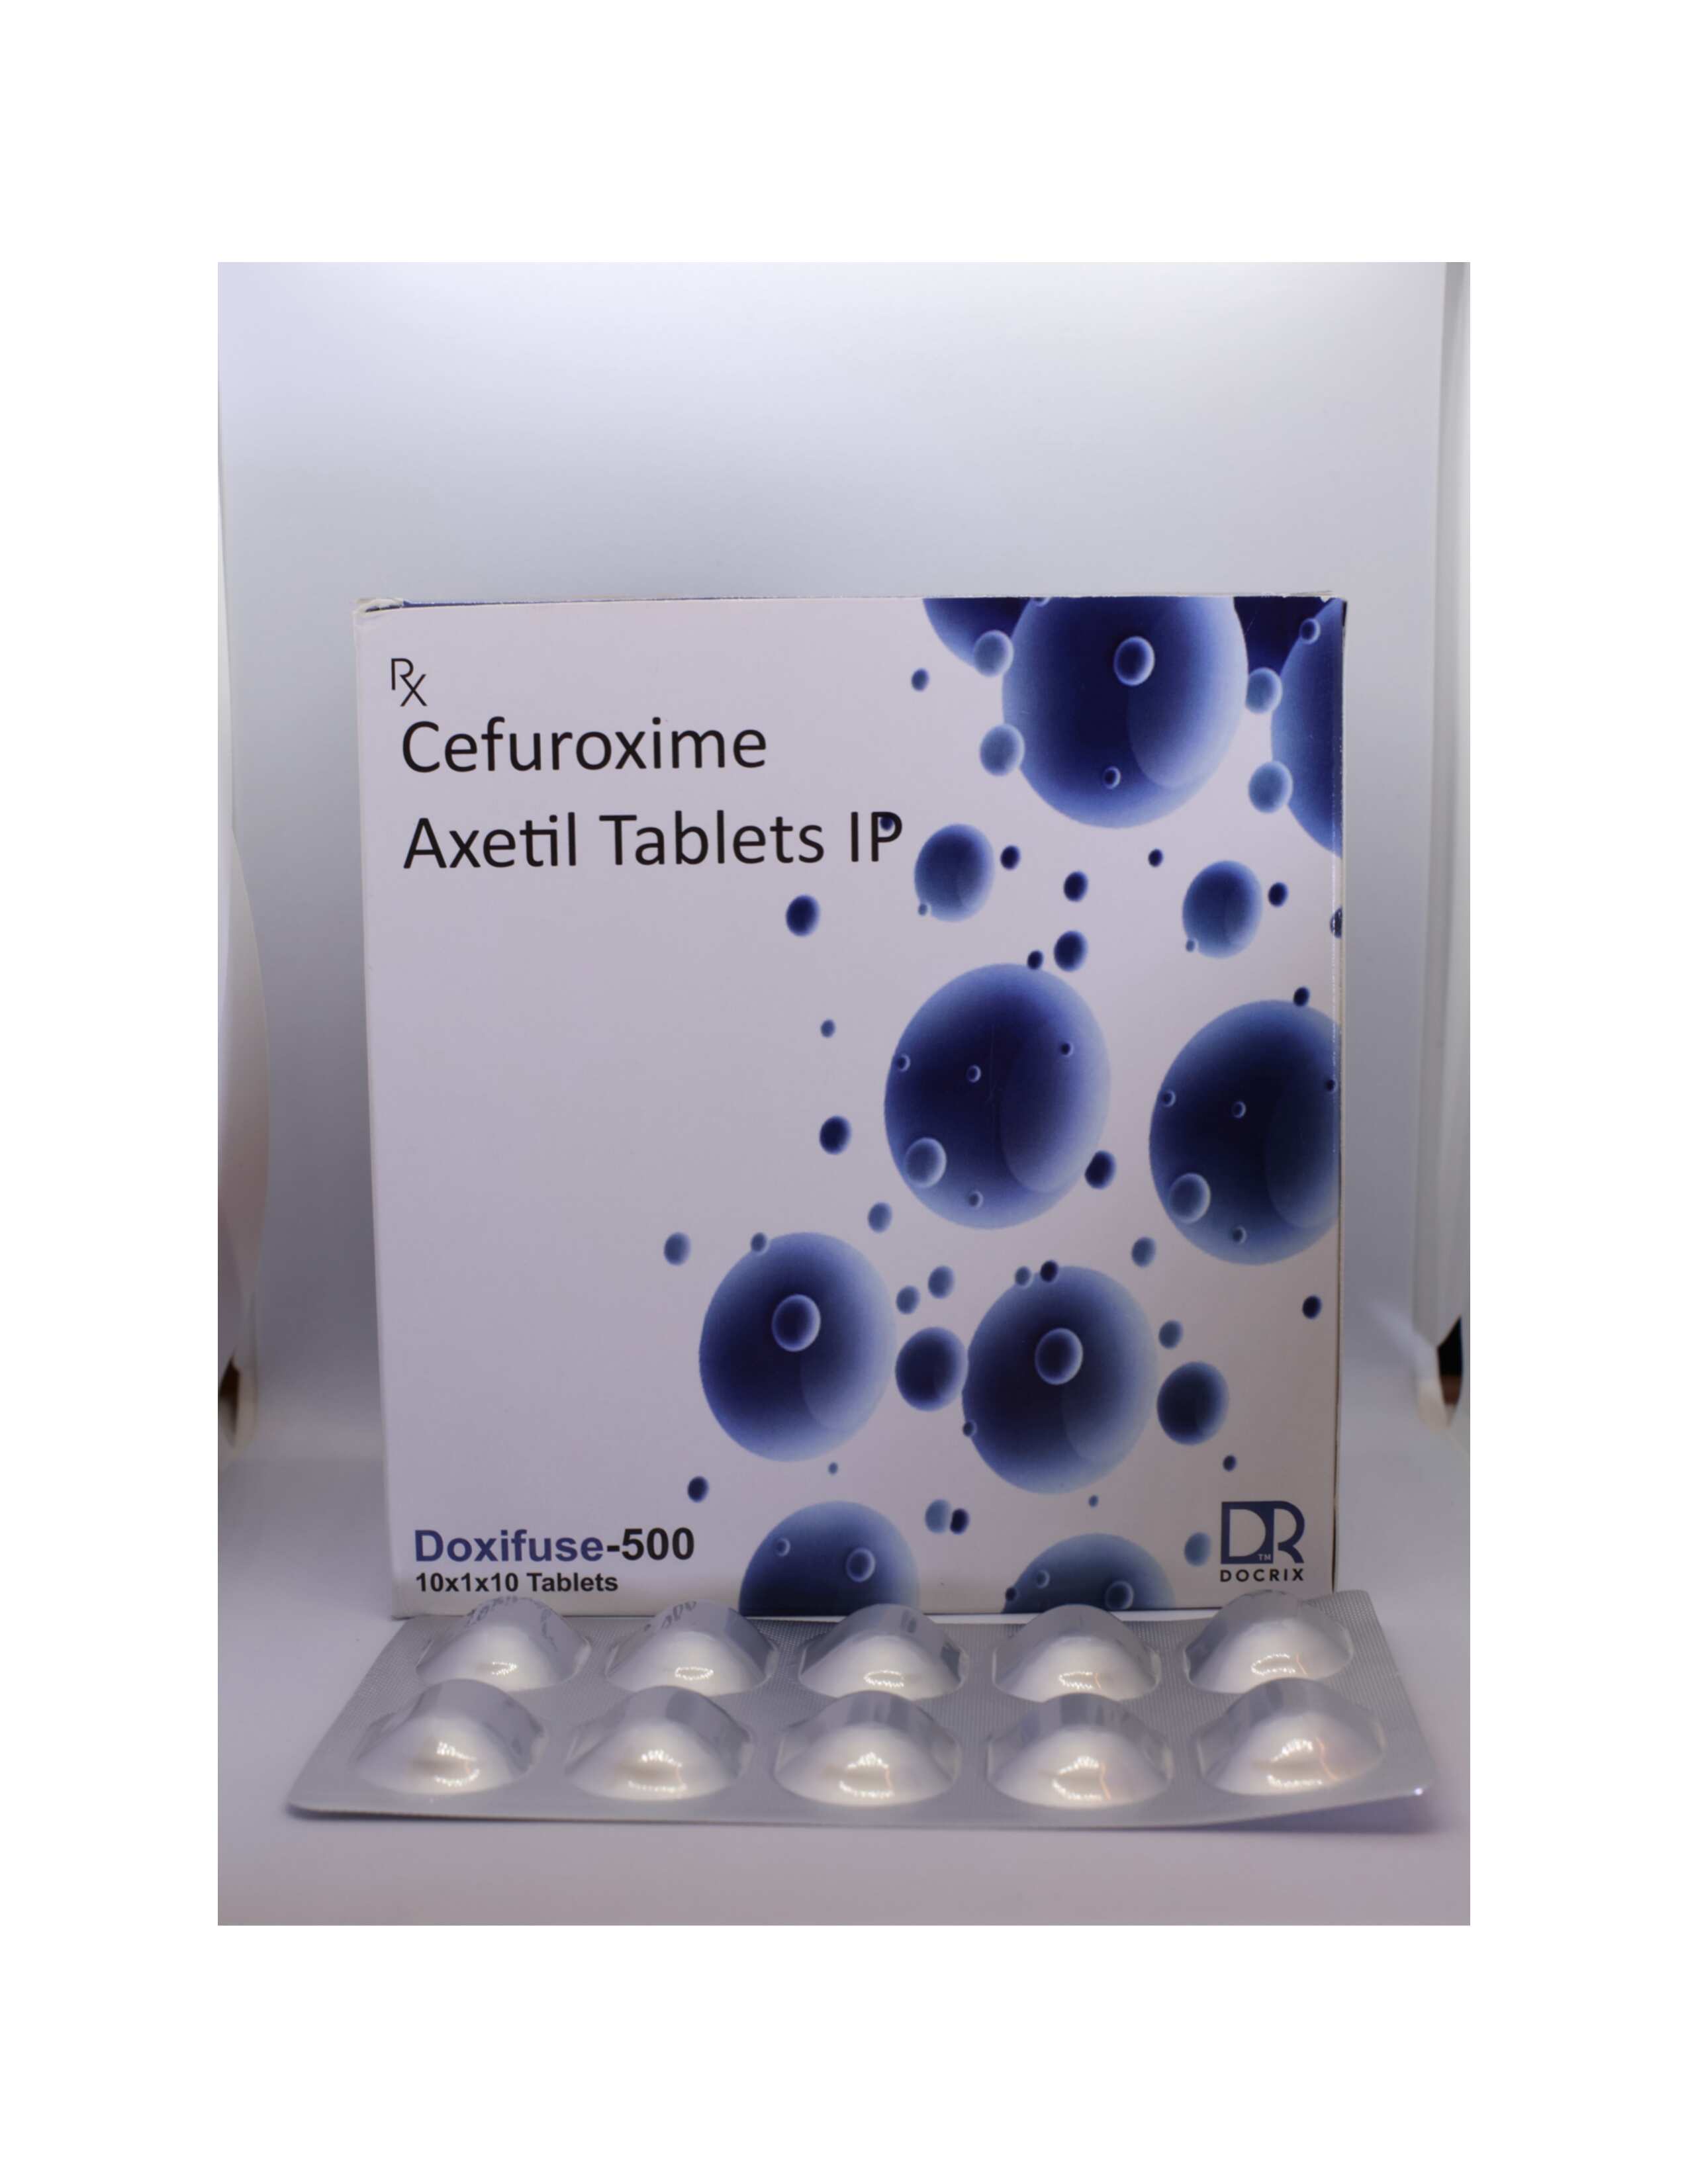 Product Name: Doxifuse 500, Compositions of Doxifuse 500 are Cefuroxmine  Axetil Tablets IP - Docrix Healthcare